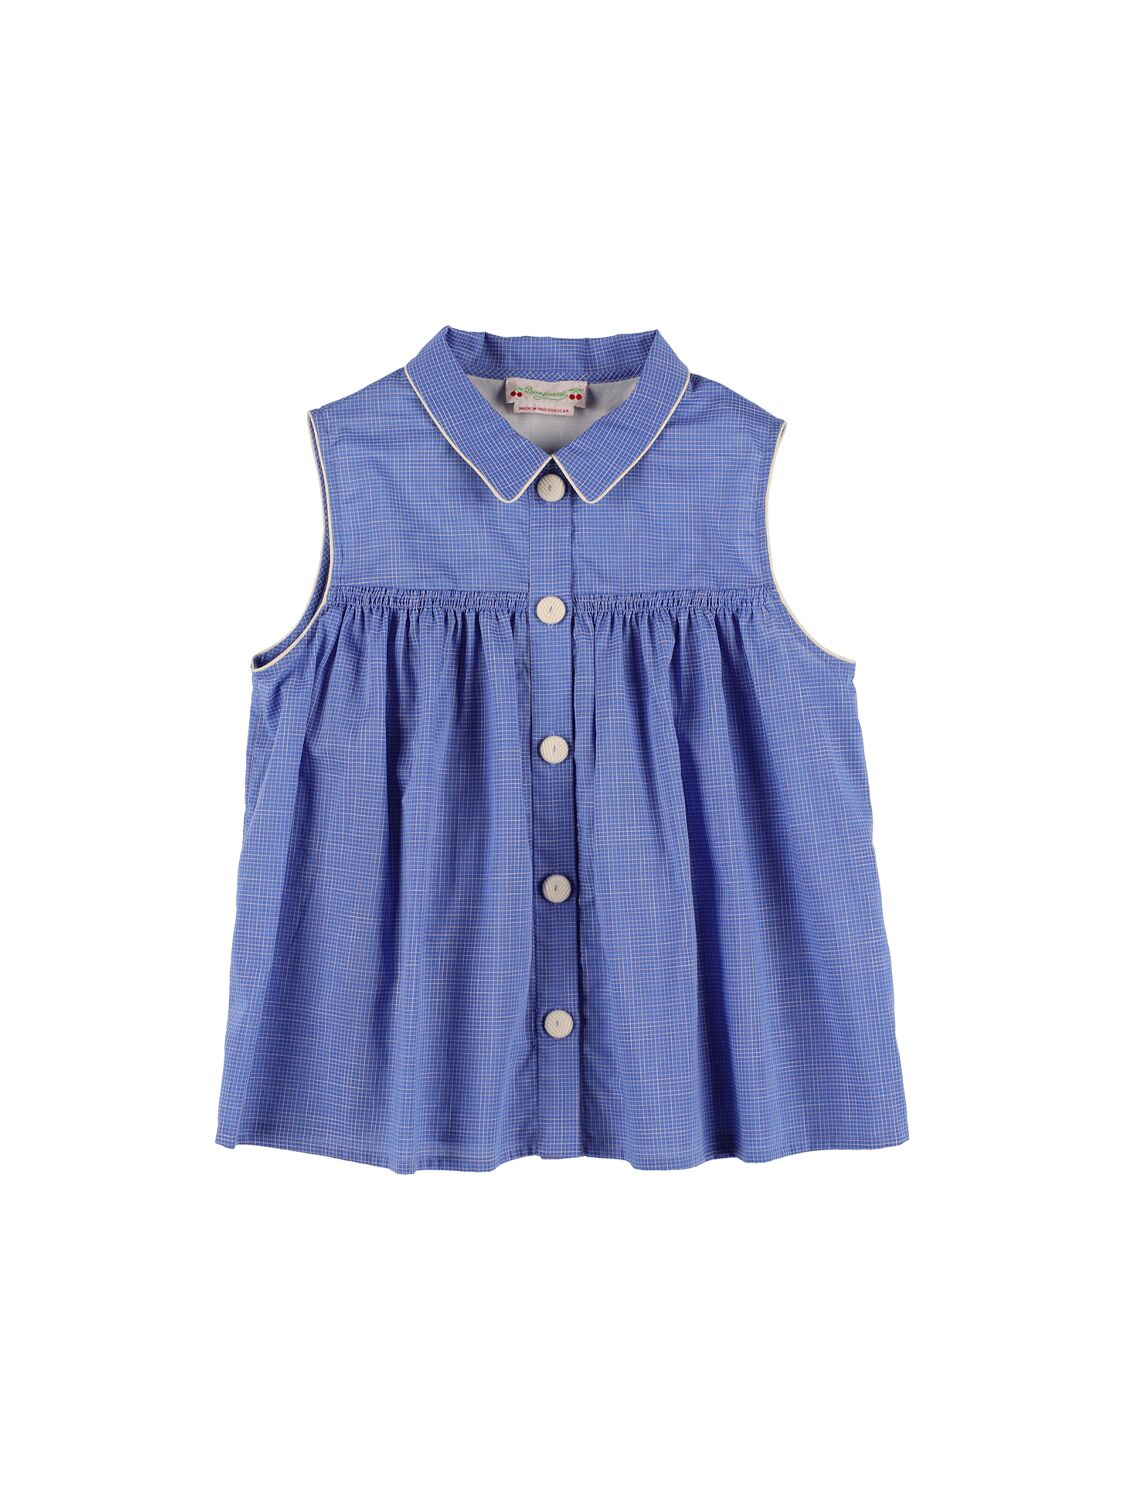 Bonpoint Kids' Cotton Chambray Top In Blue